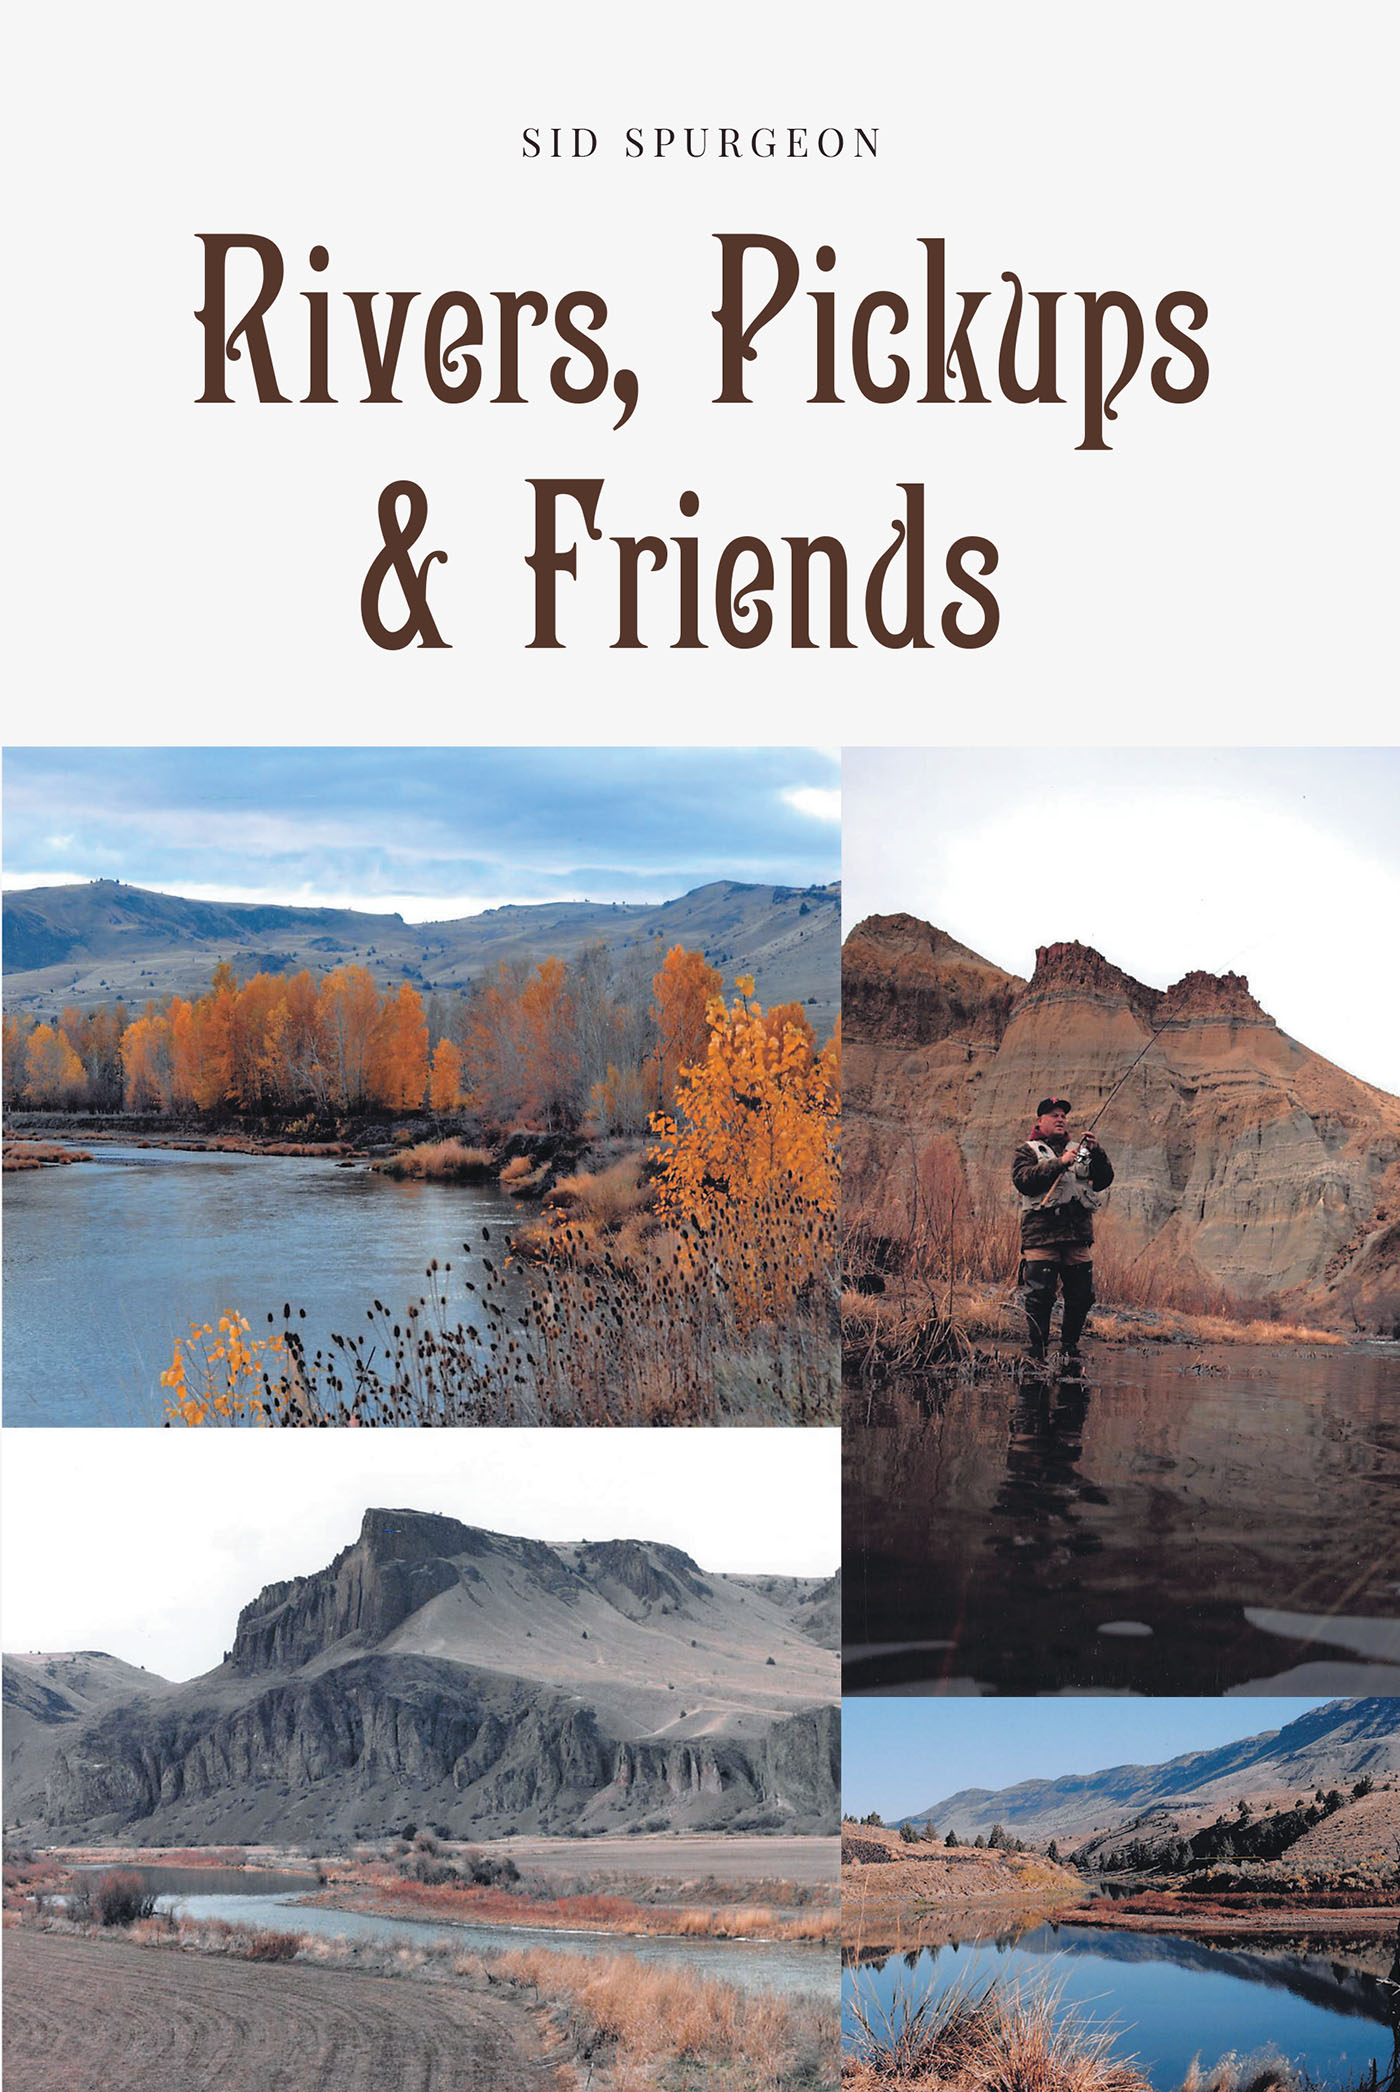 Author Sid Spurgeon’s New Book, "Rivers, Pickups, and Friends," Follows Three Childhood Friends Who Find Their Lives Interconnected Through Every Step of Their Lives